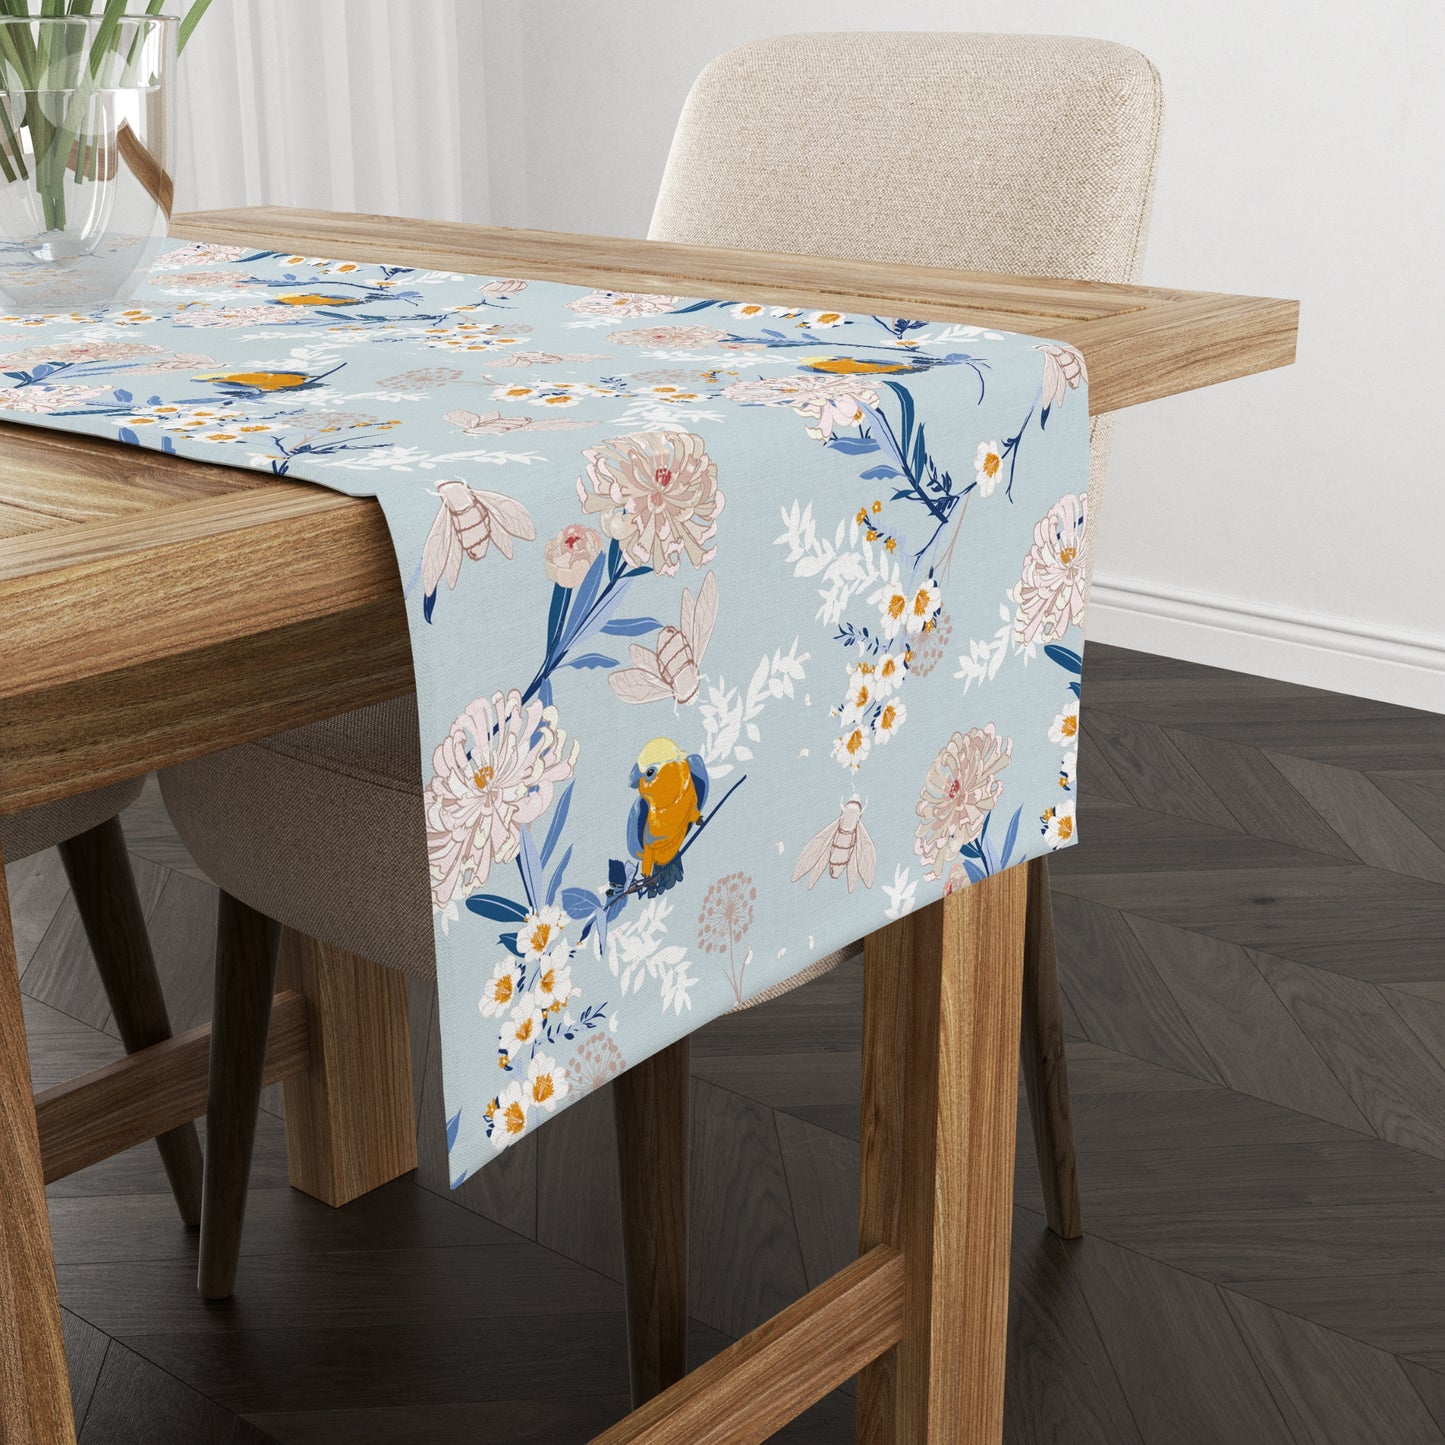 a wooden table topped with a blue table cloth